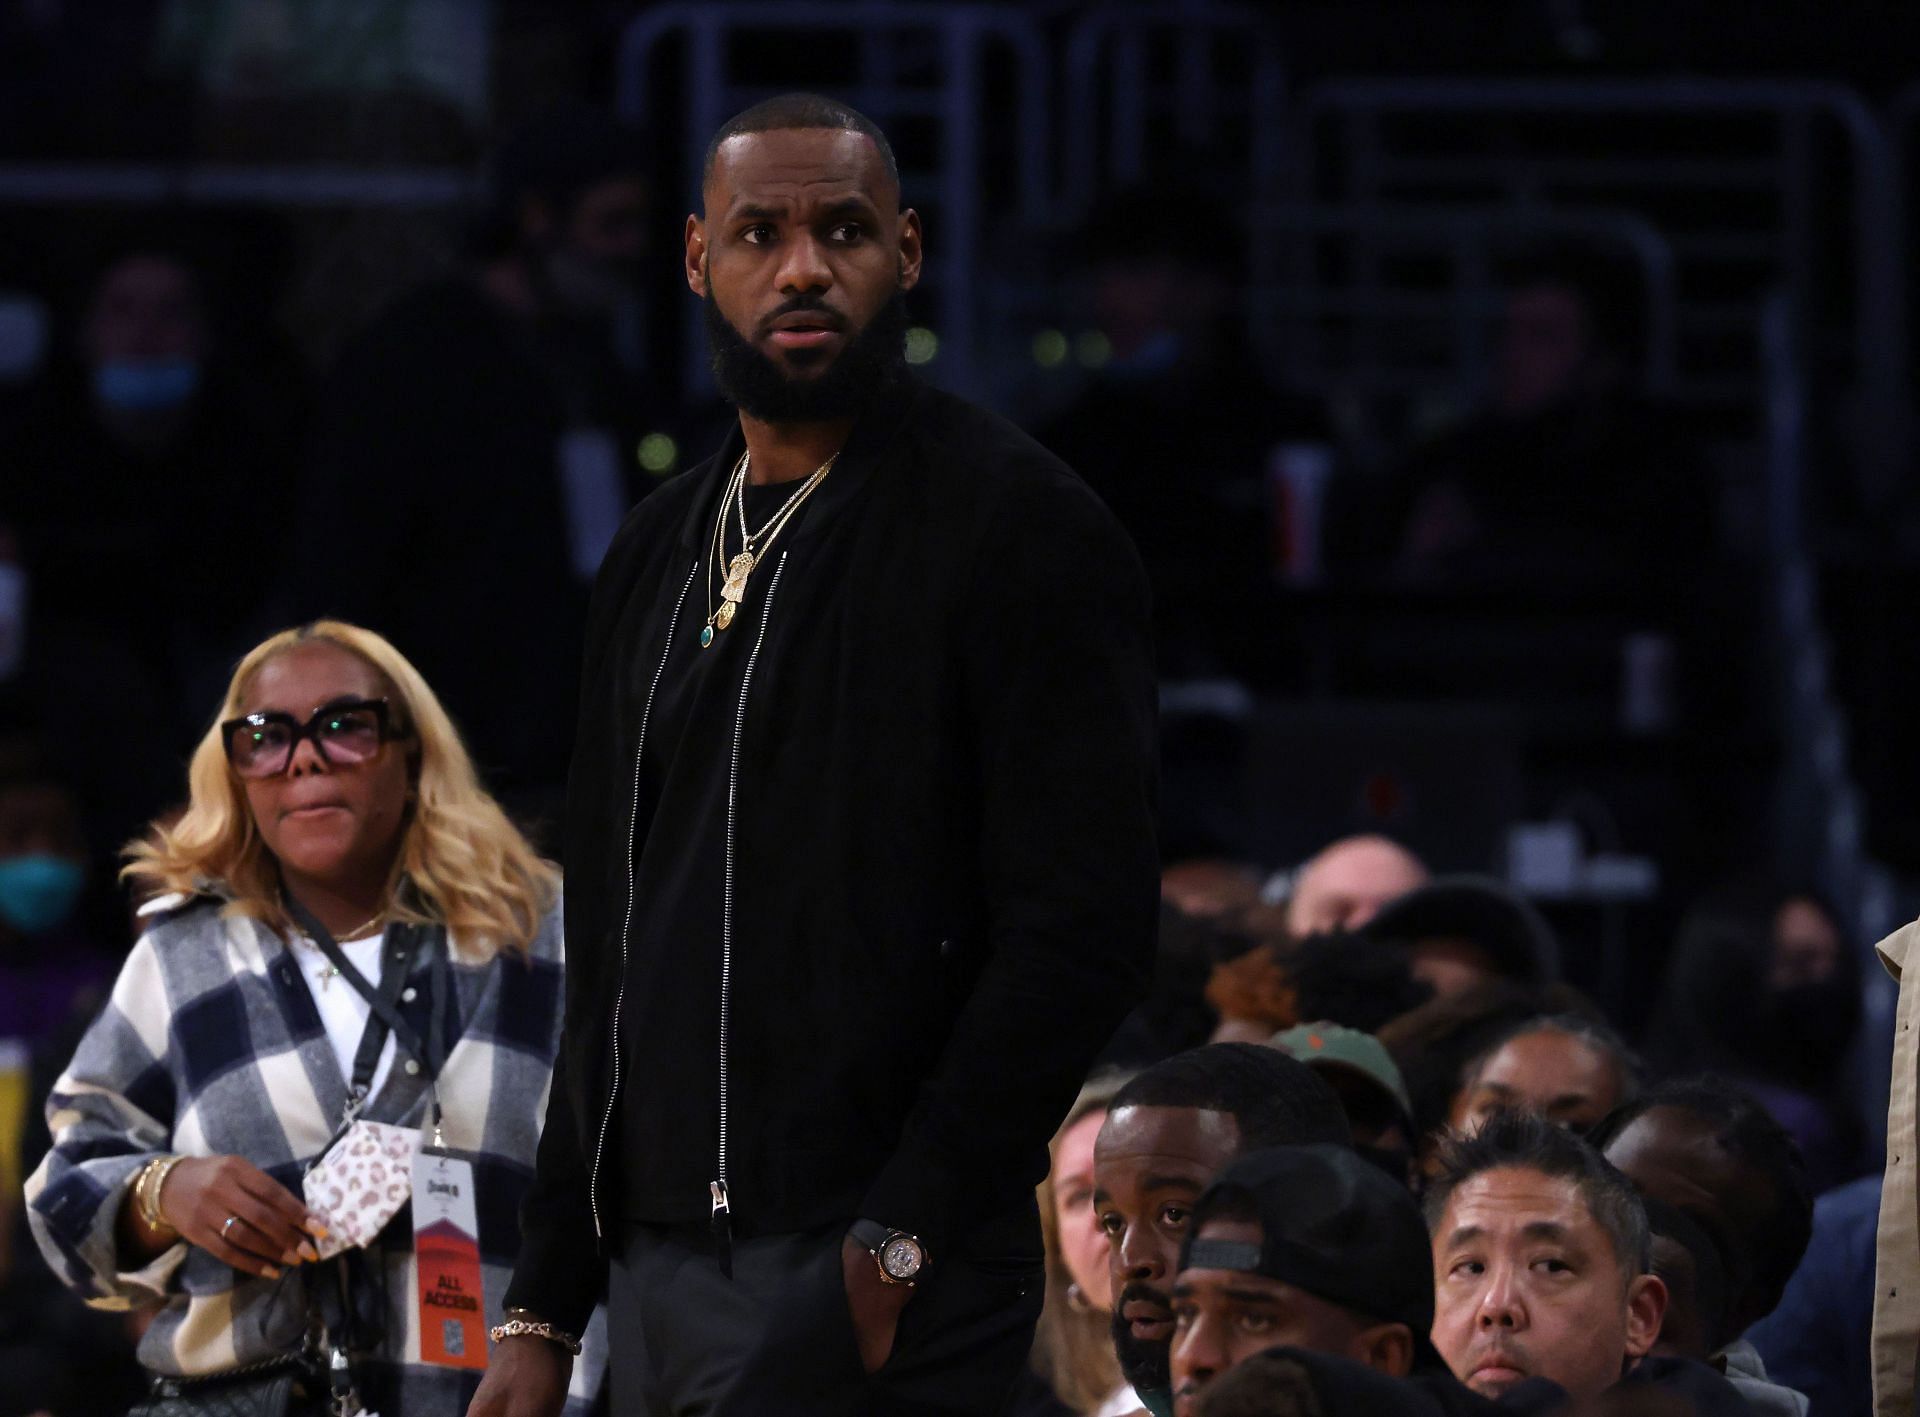 LeBron James watching his son play at the Staples Center